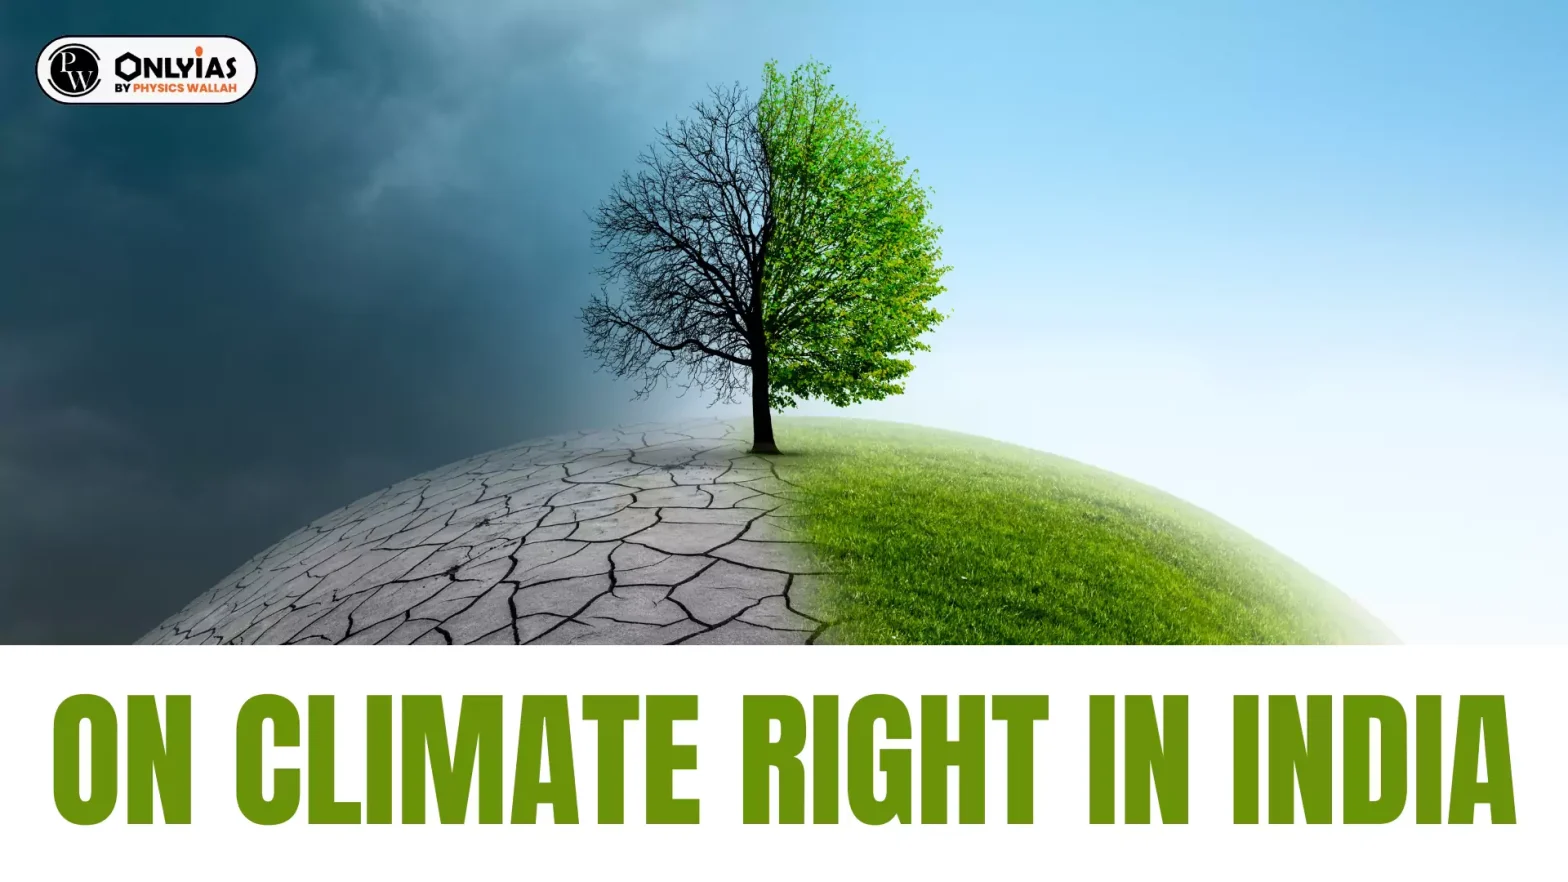 On Climate Right In India